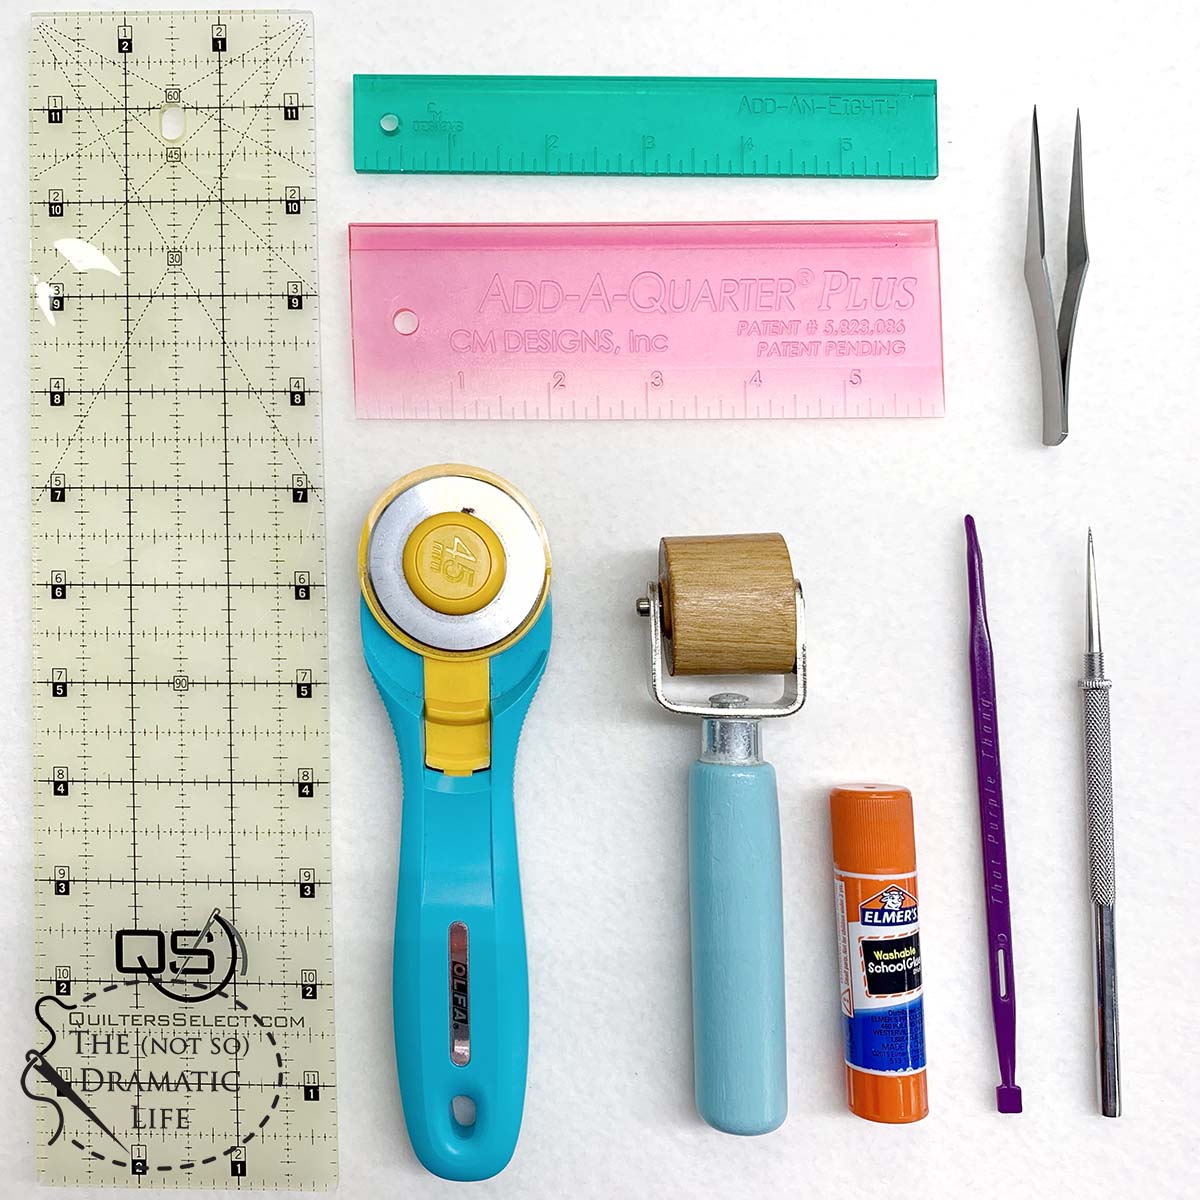 The Best Sewing Supplies for Beginners - The Seasoned Homemaker®